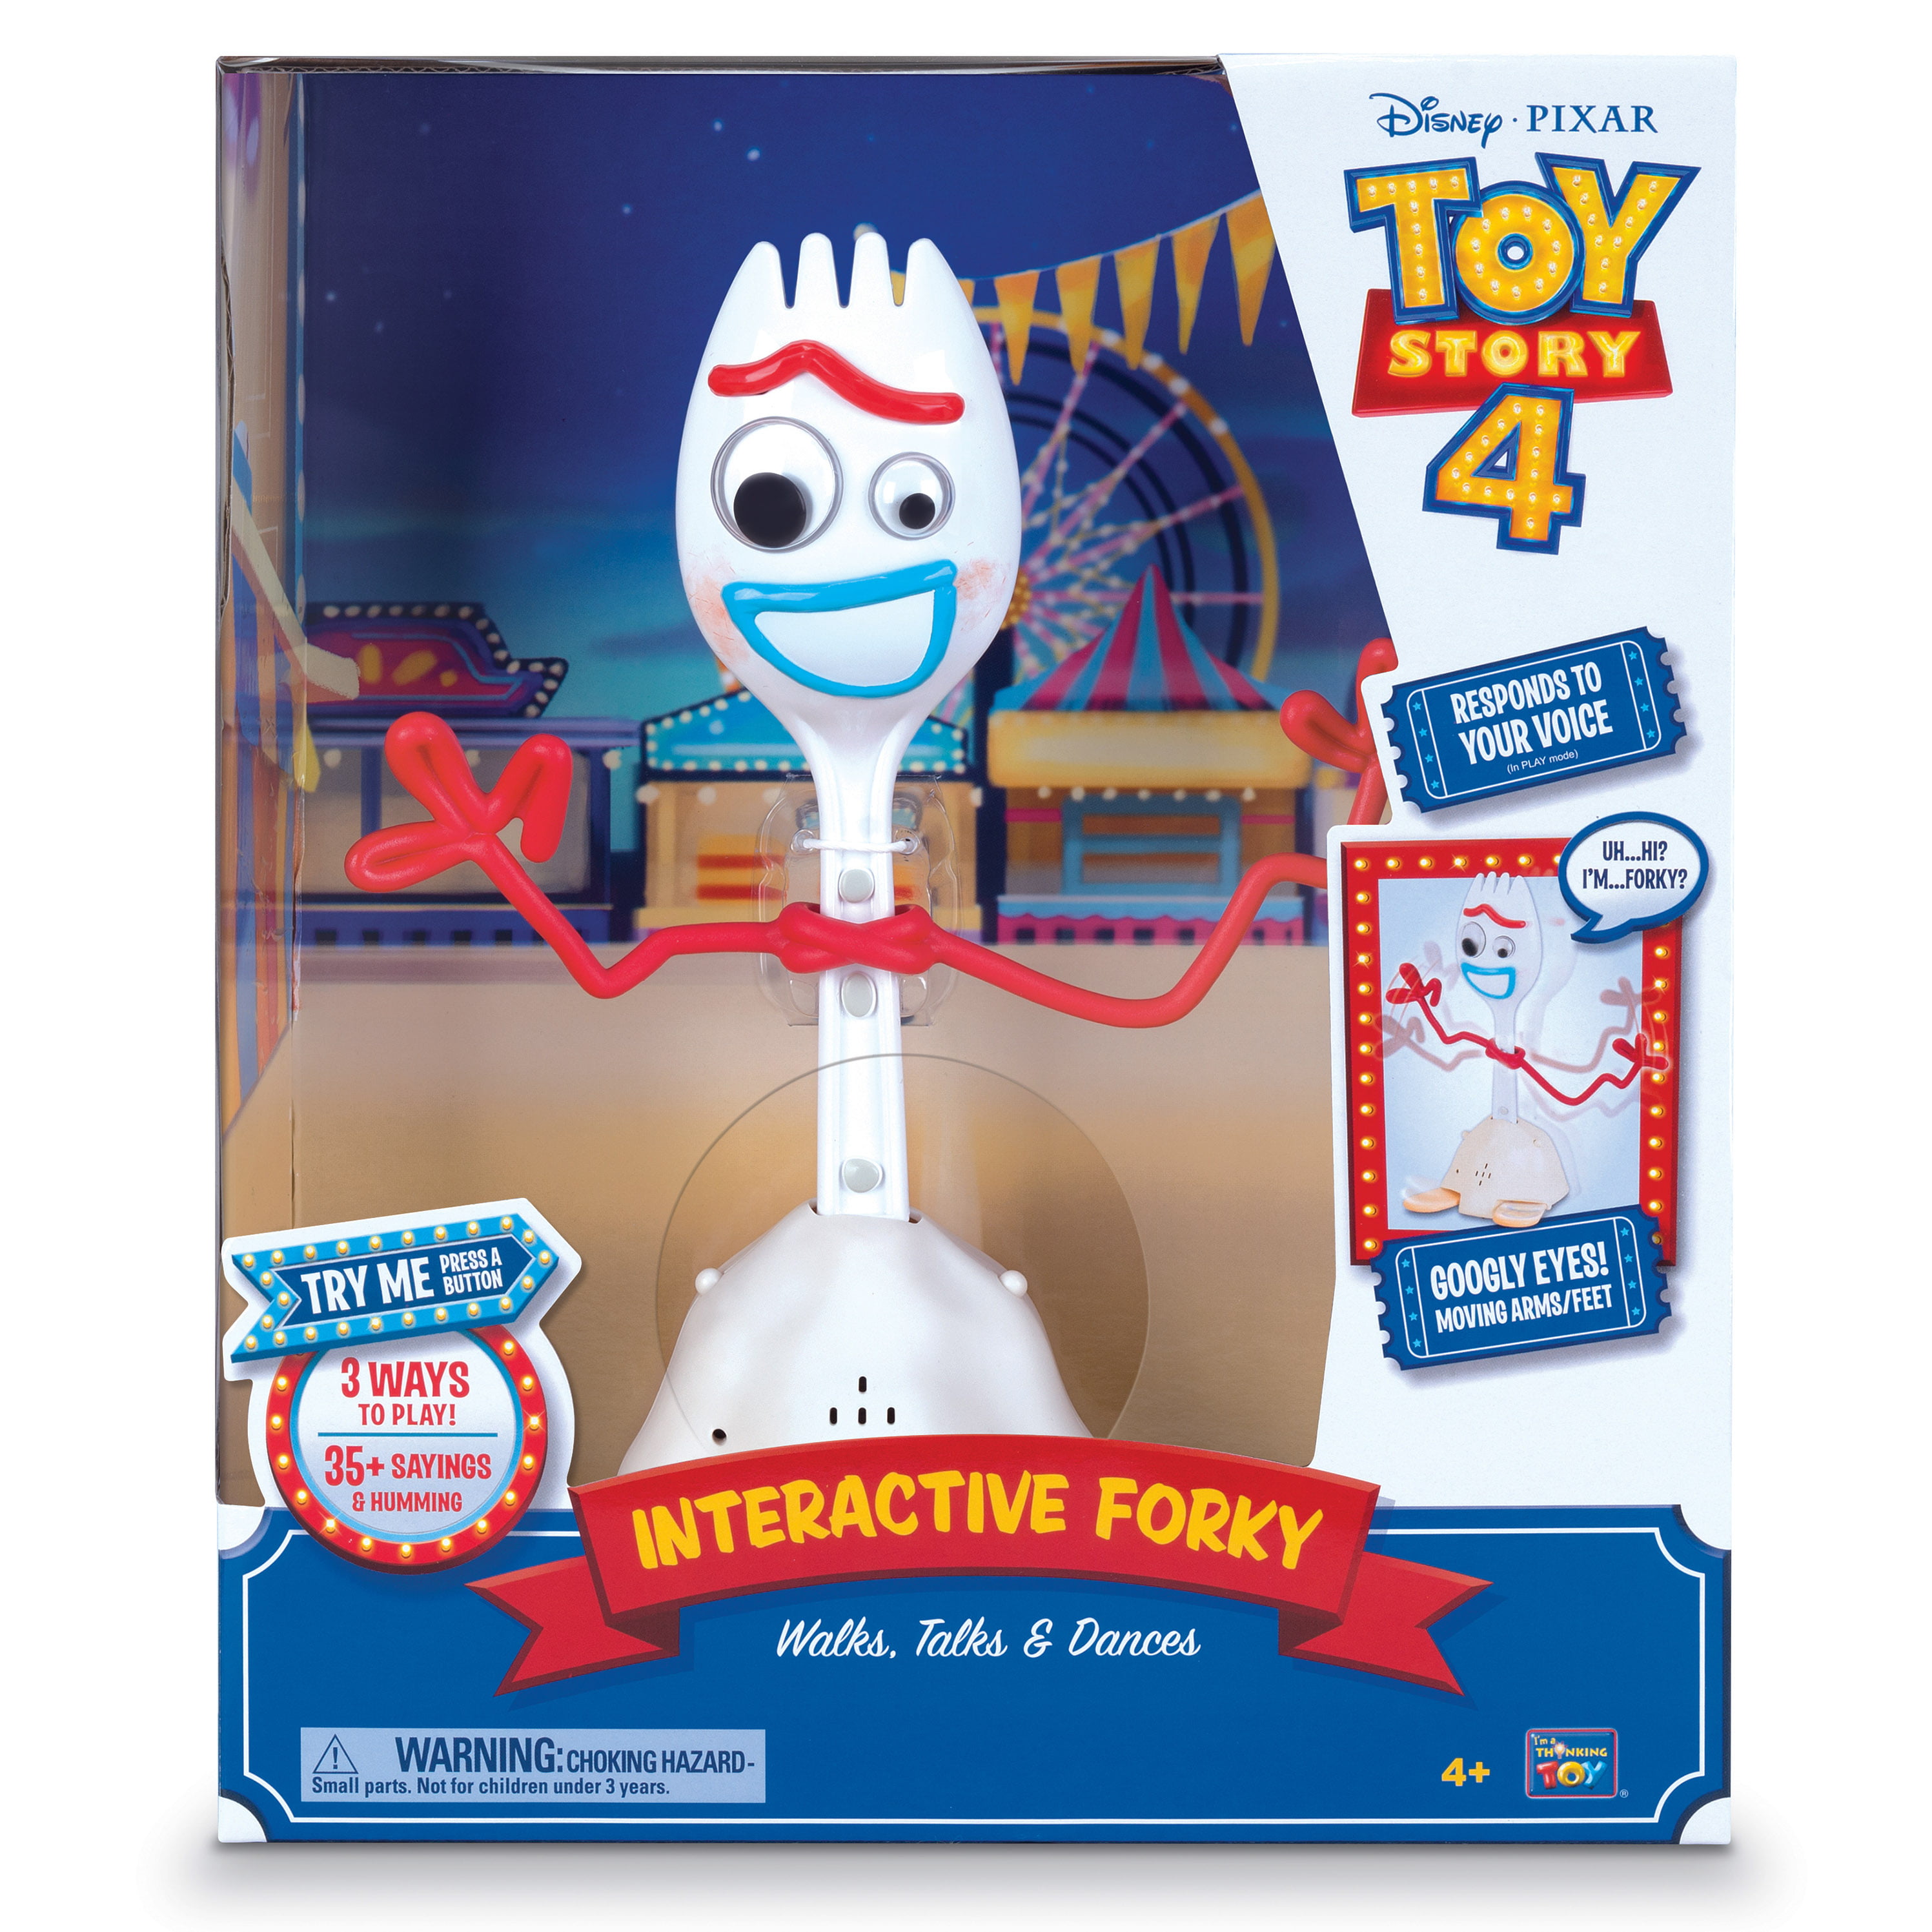 Parents slam Disney for selling a £13 toy Forky from the latest